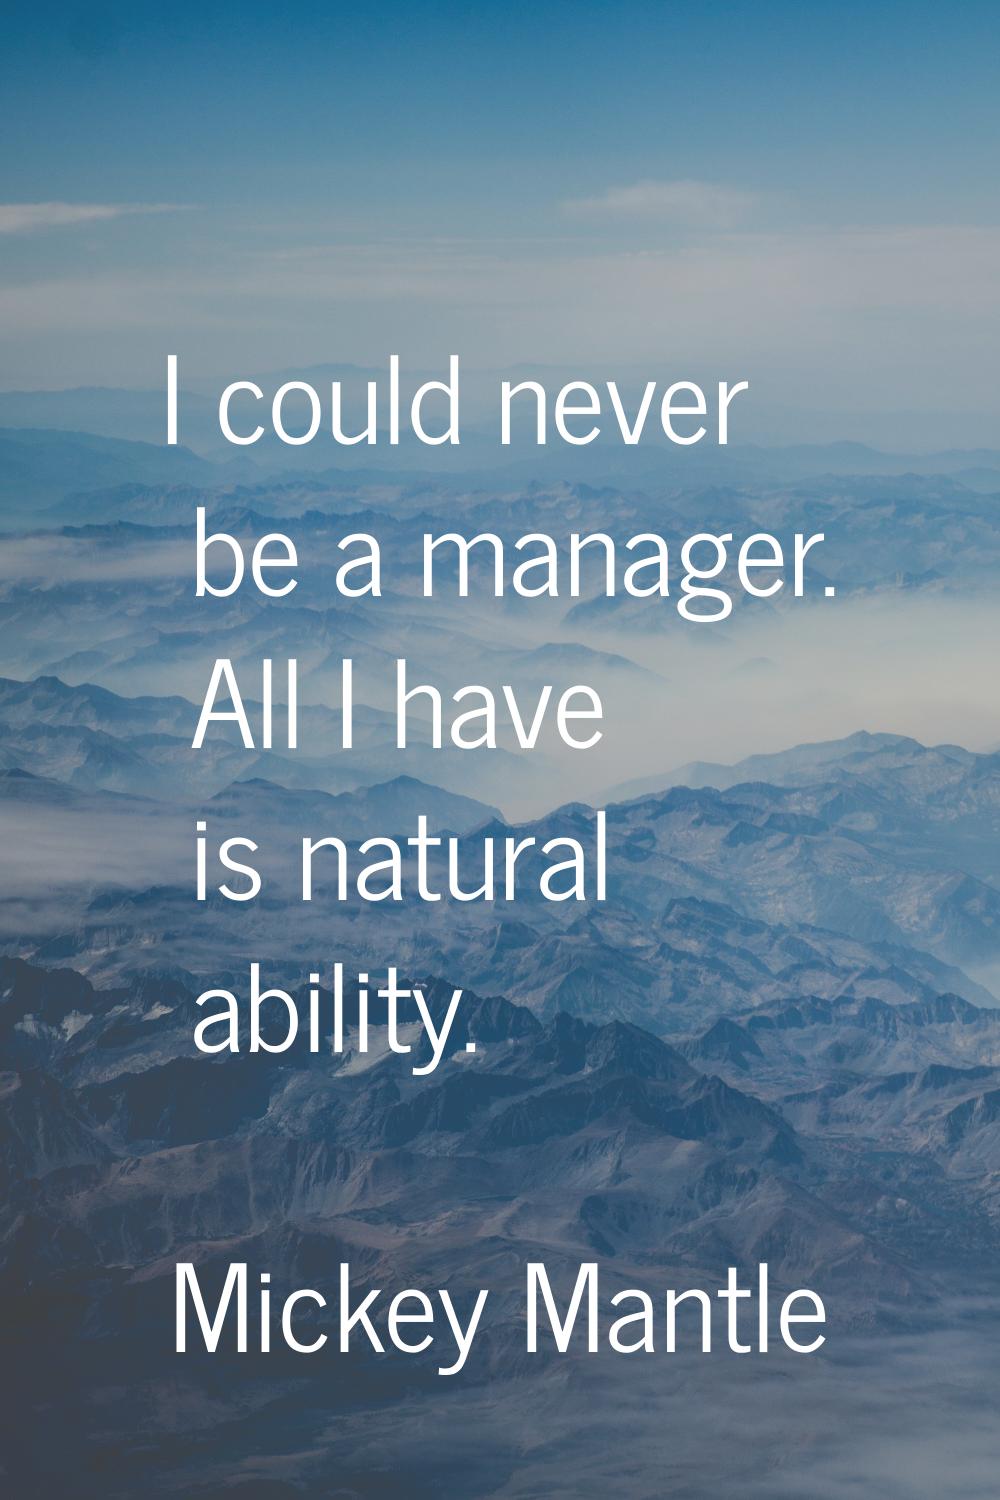 I could never be a manager. All I have is natural ability.